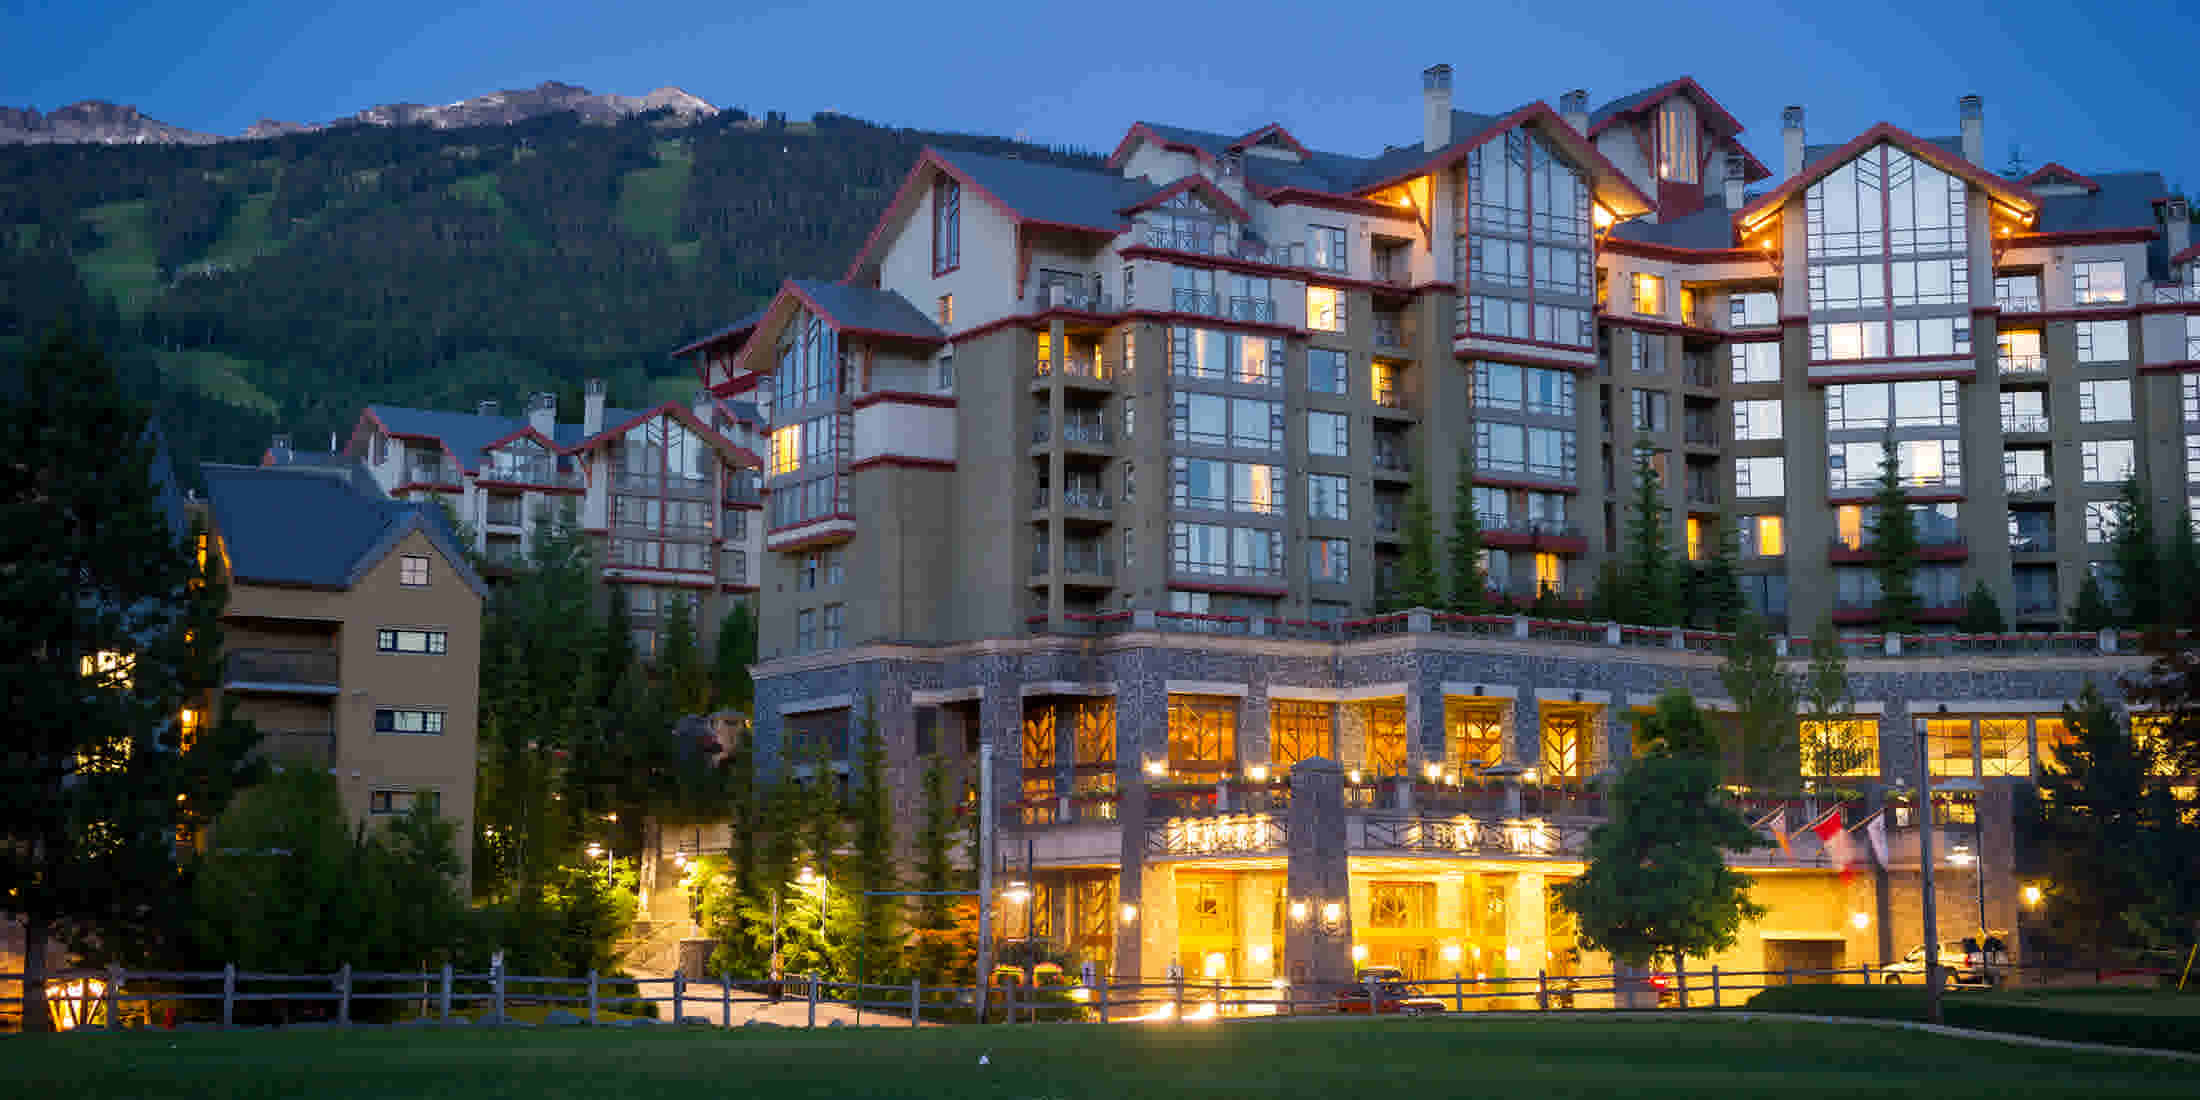 Best Hotels and Accommodation in Whistler